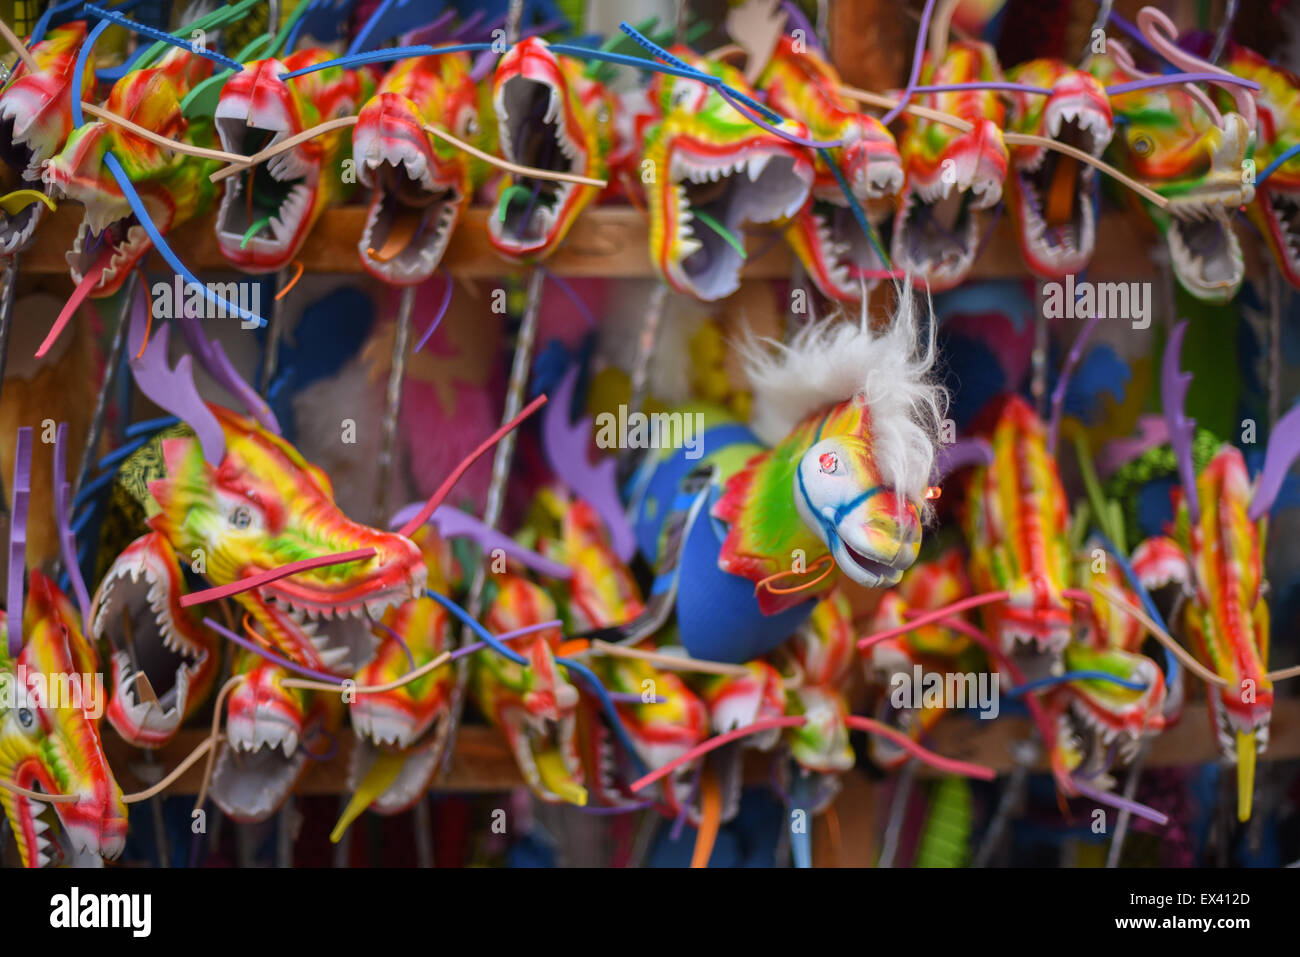 Dragon-like toys at a street vendor during the Lunar New Year celebration in Bandung, Indonesia. Stock Photo